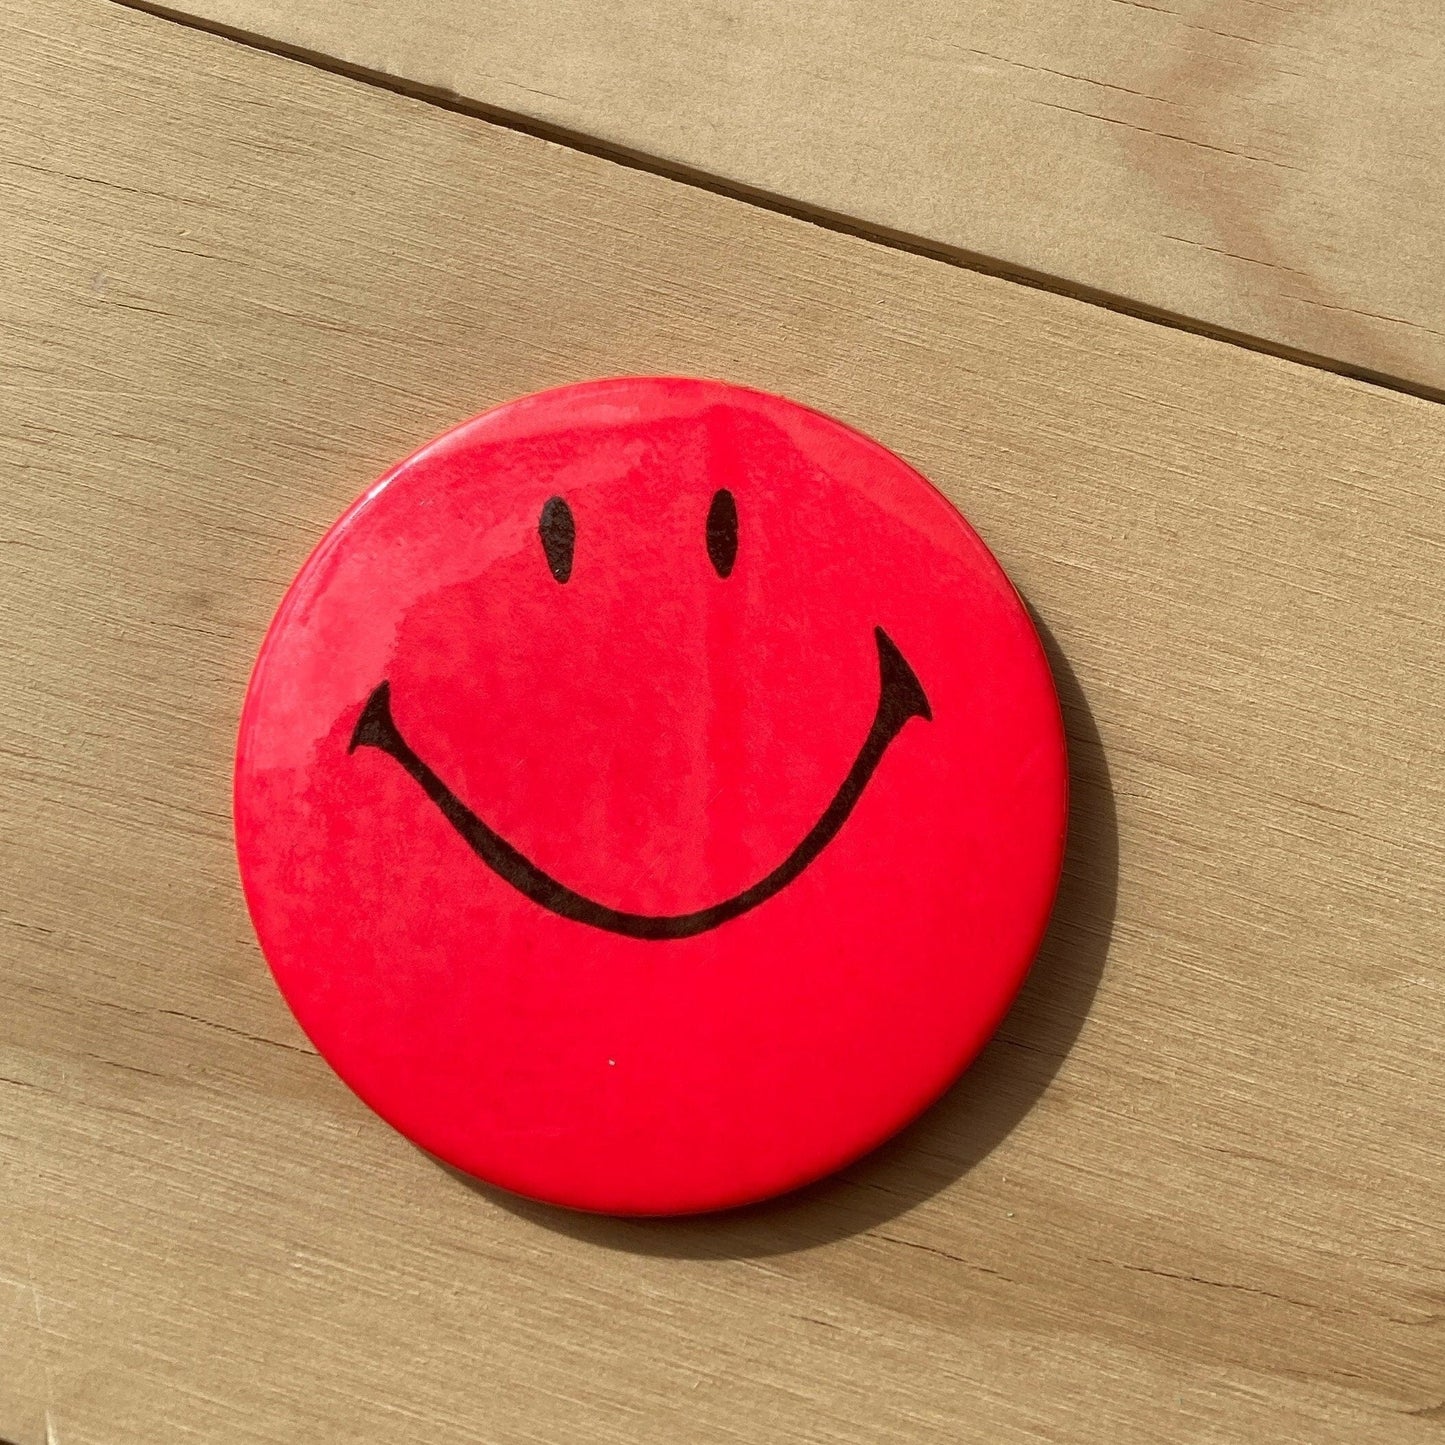 Vintage Pin Back Button - 1970’s Smiley Face Pin - Hot Pink - 3.5” Button